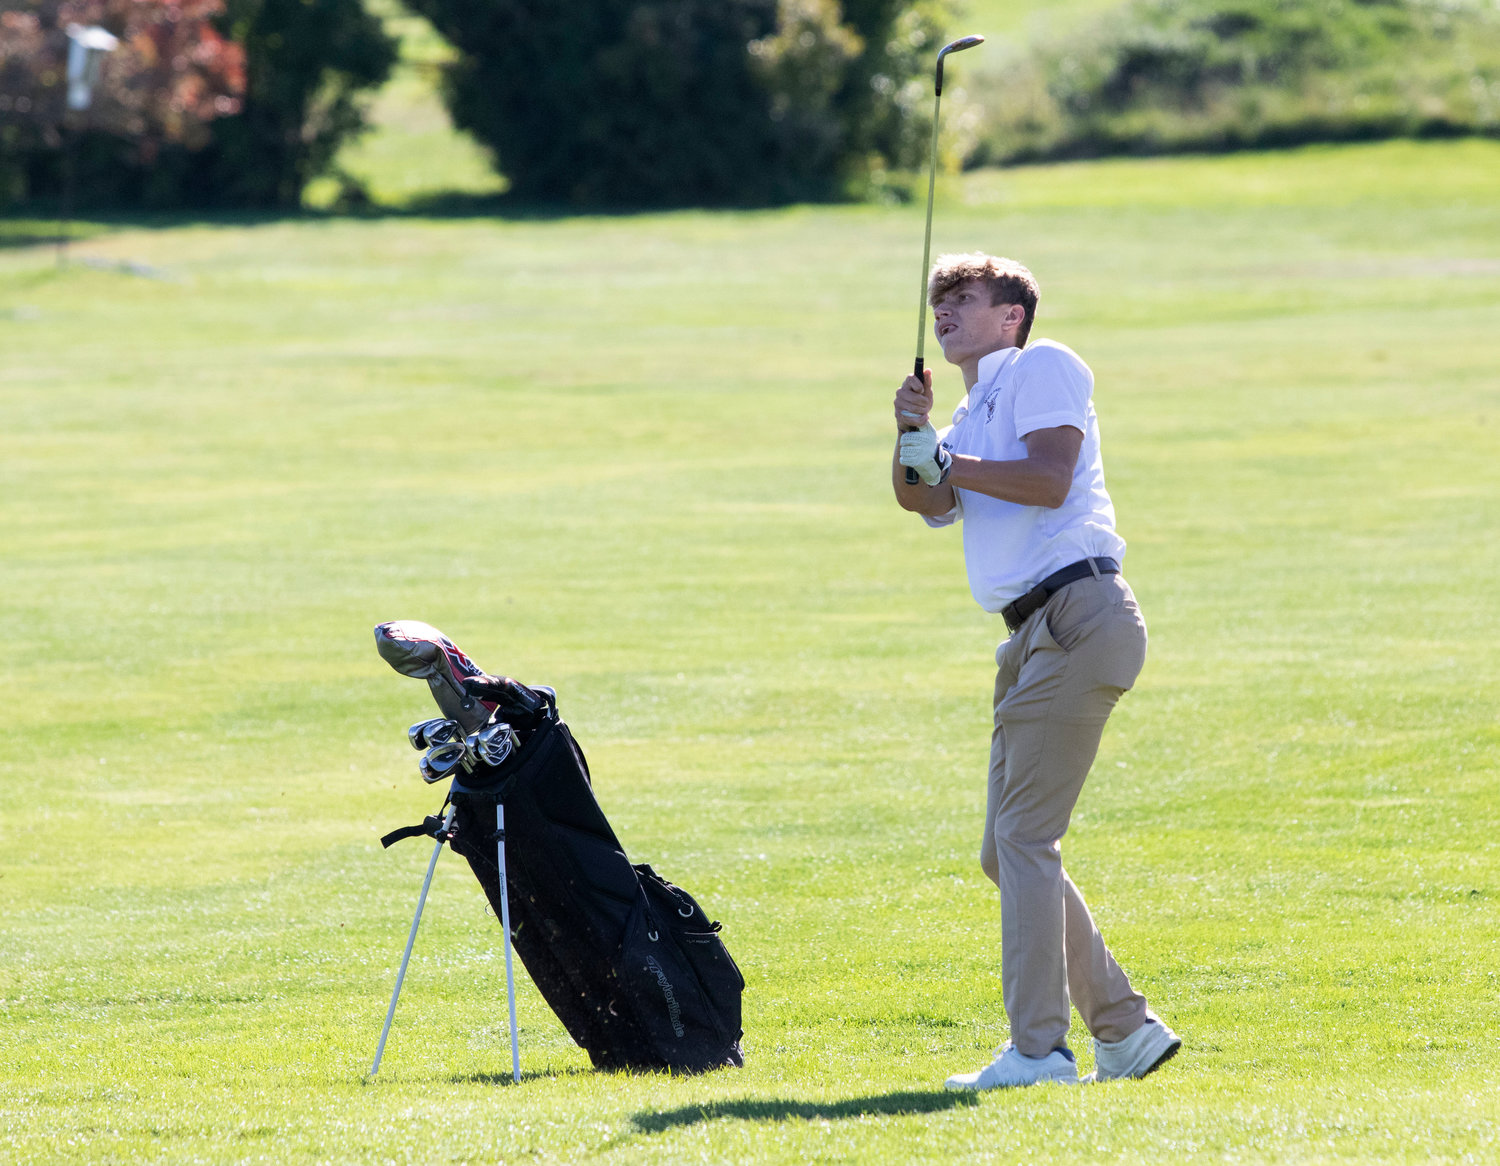 Avery Viveiros, Westport’s number one golfer, hits an approach shot onto the first green at Acoaxet.